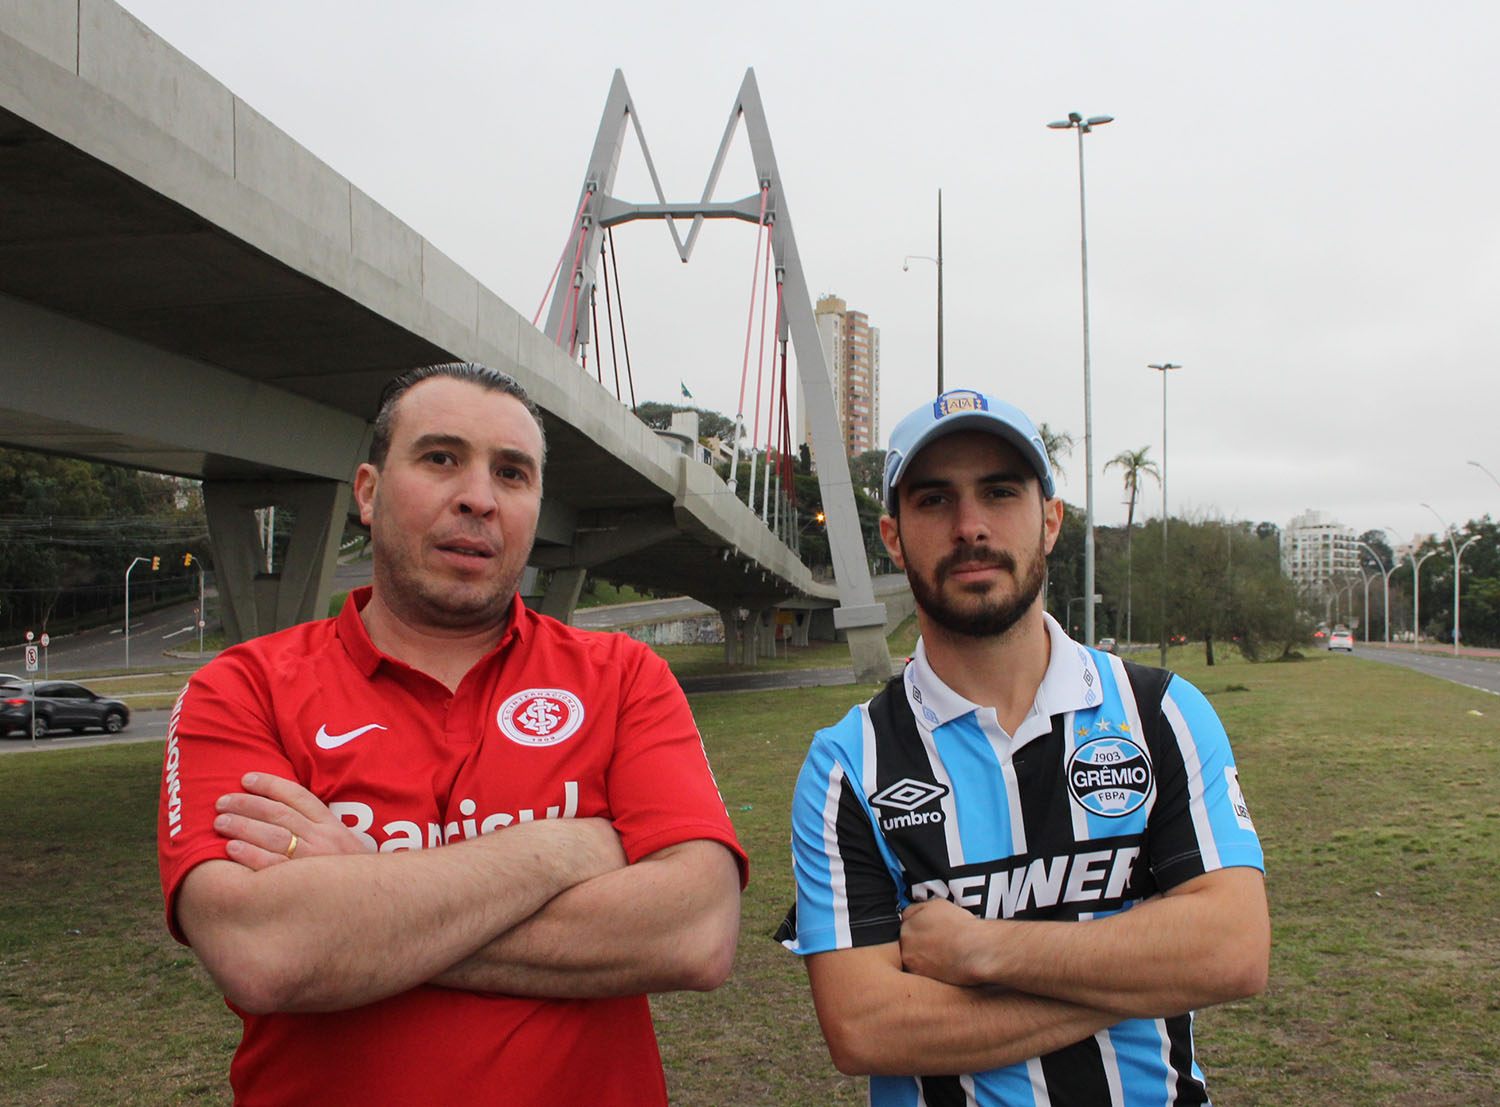 Diehards supporting Inter and Grêmio diehard meet beneath the highway overpass that's become yet another point of contention between the teams' fans. 